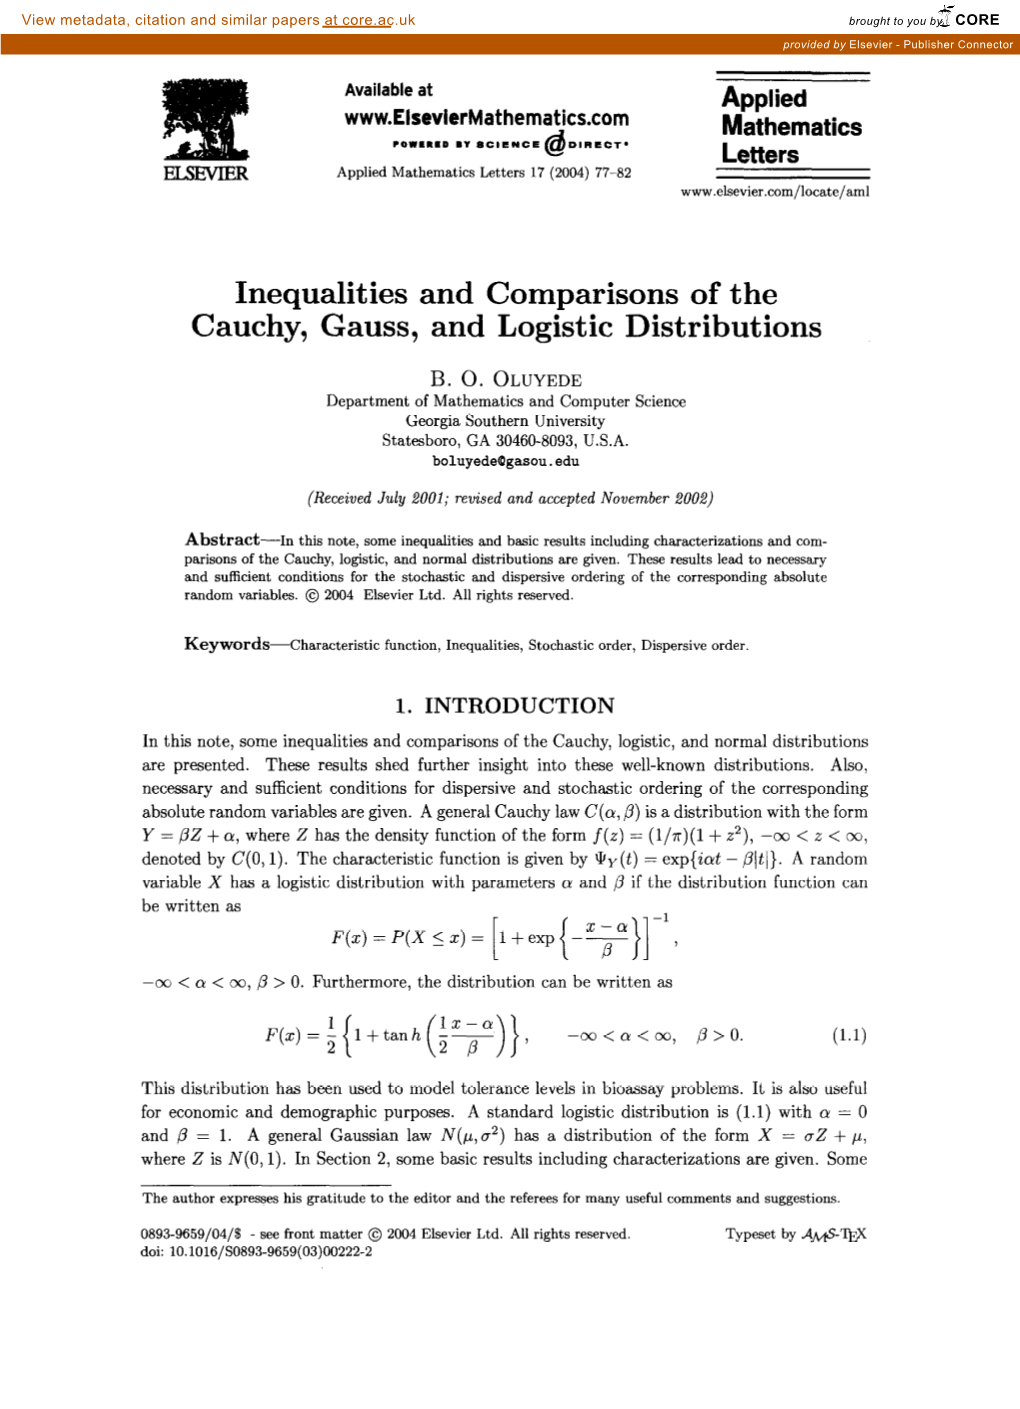 Inequalities and Comparisons of the Cauchy, Gauss, and Logistic Distributions